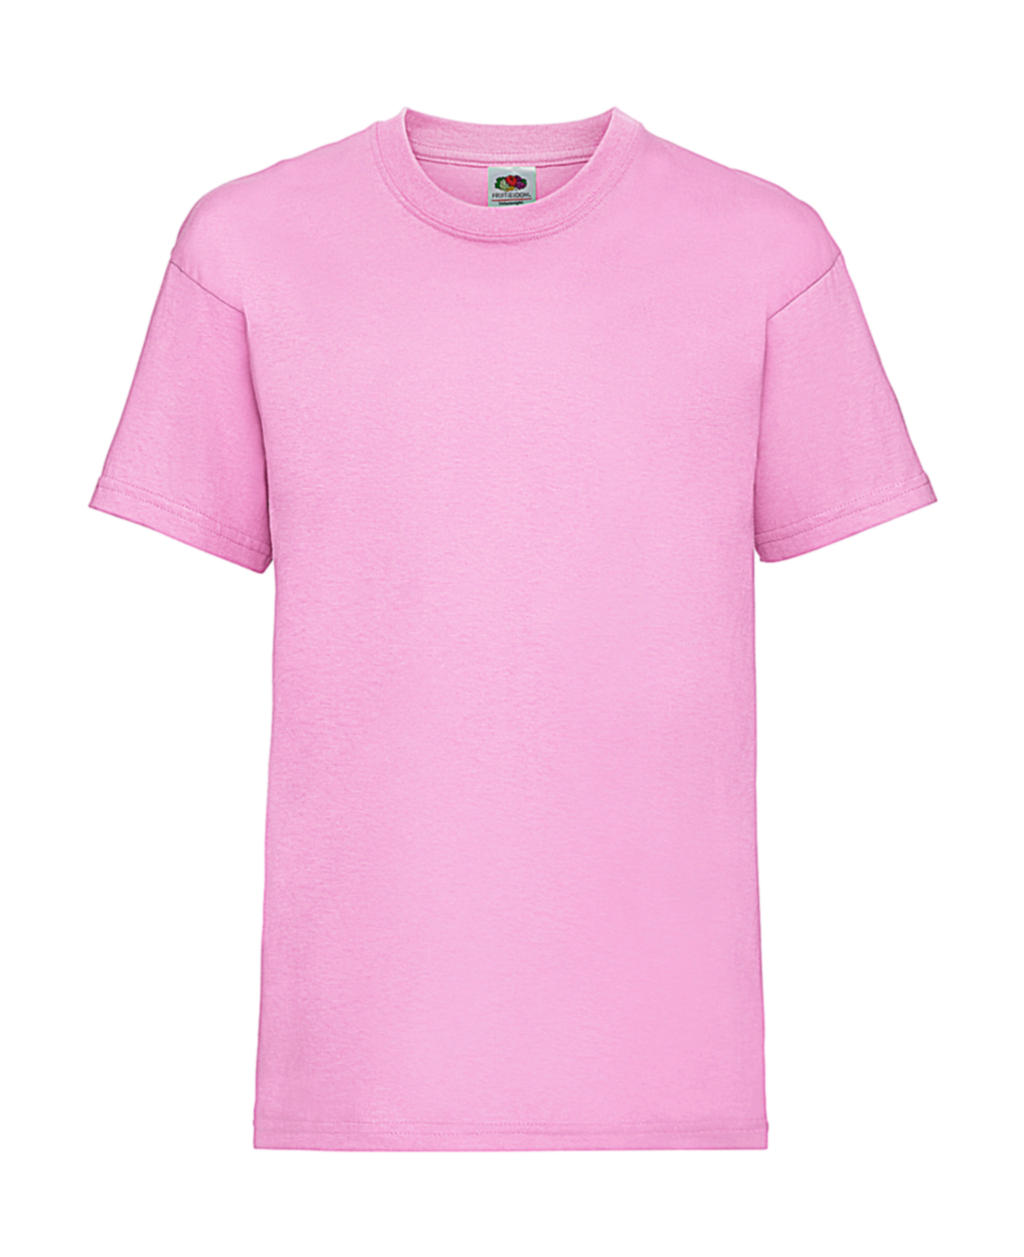  Kids Valueweight T in Farbe Light Pink